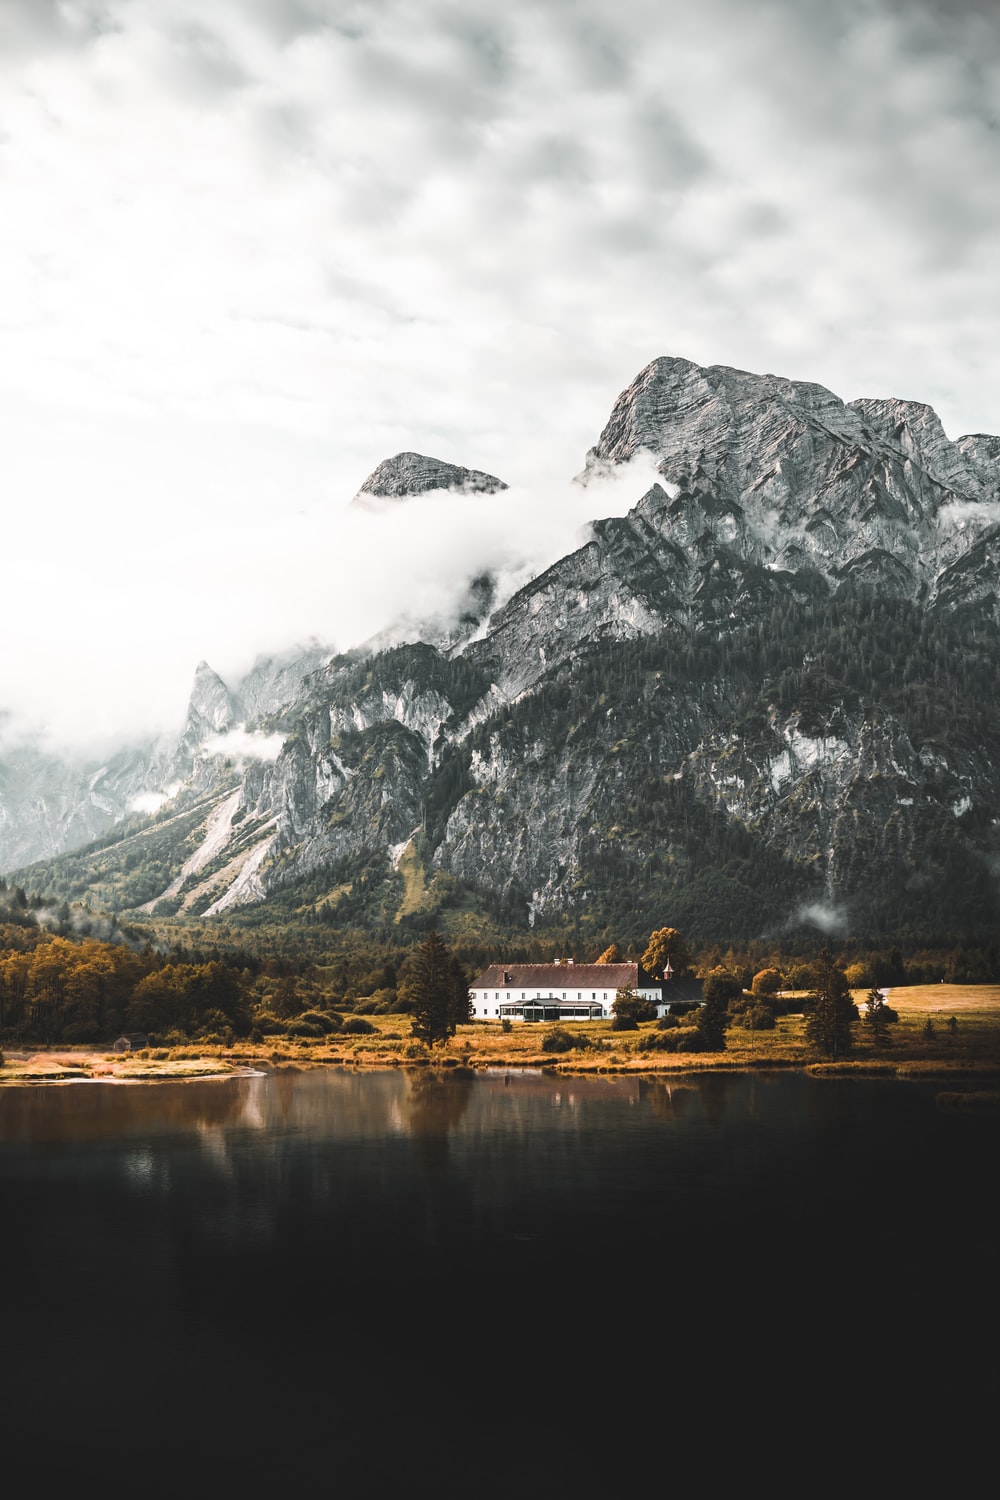 The Alps Austria Wallpapers